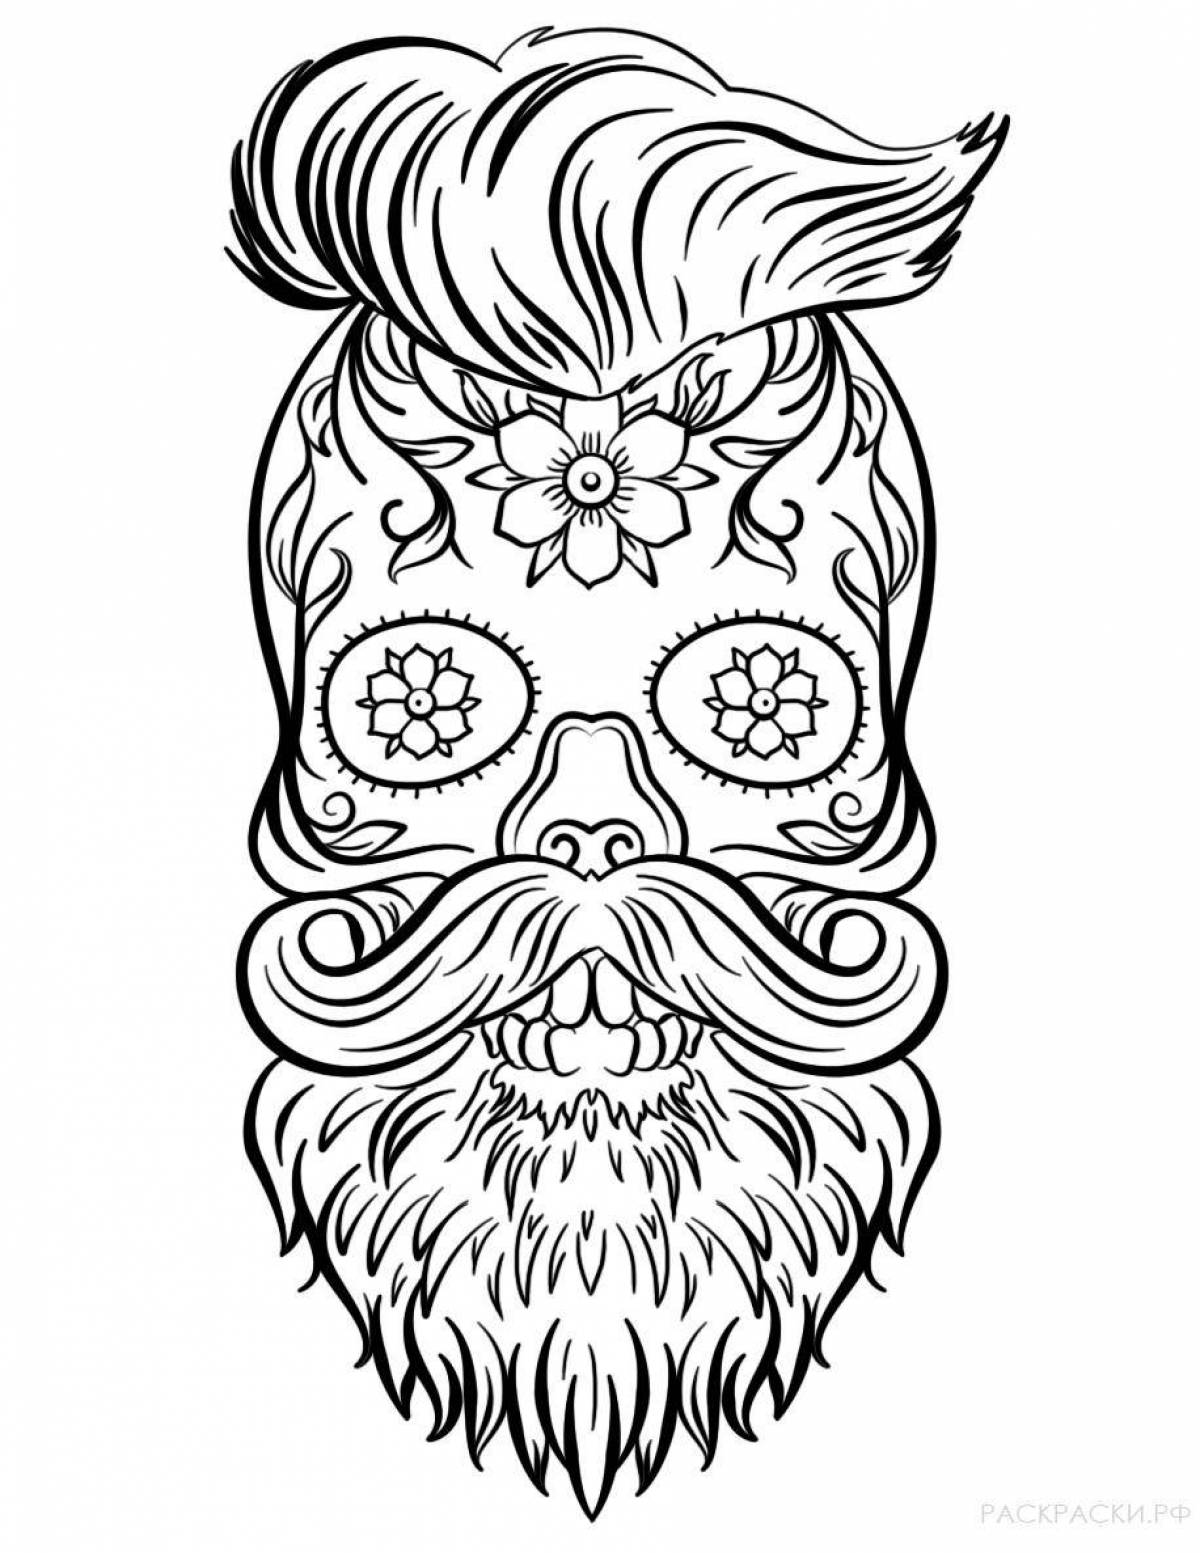 Playful bodo beard coloring page for kids